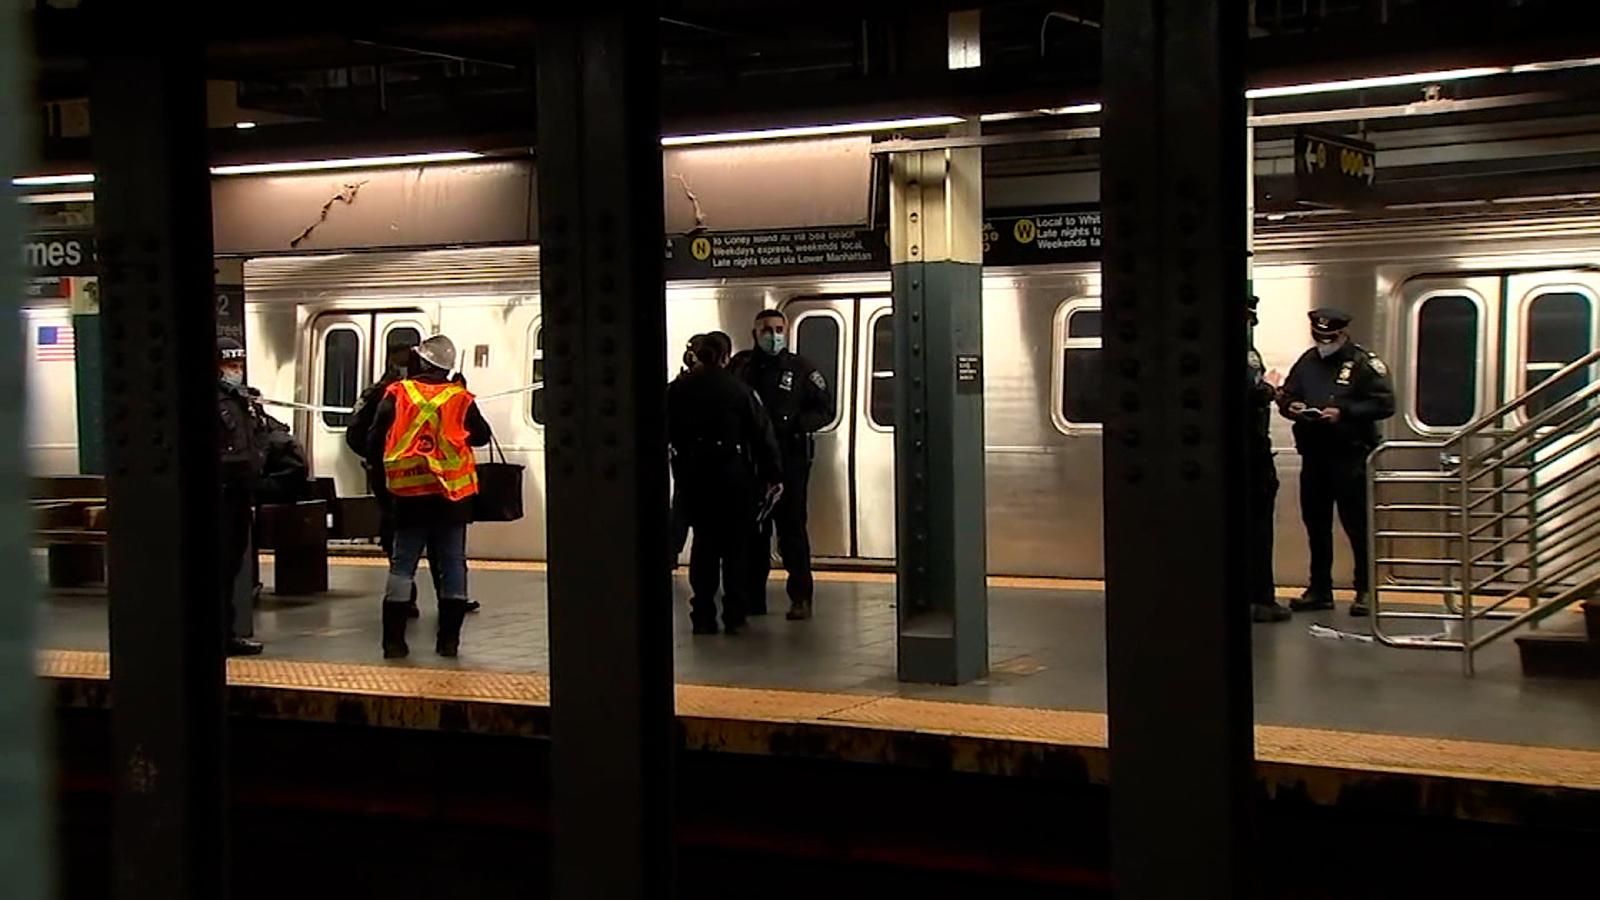 NYPD makes arrest in connection with death of Asian woman who was pushed in front of train